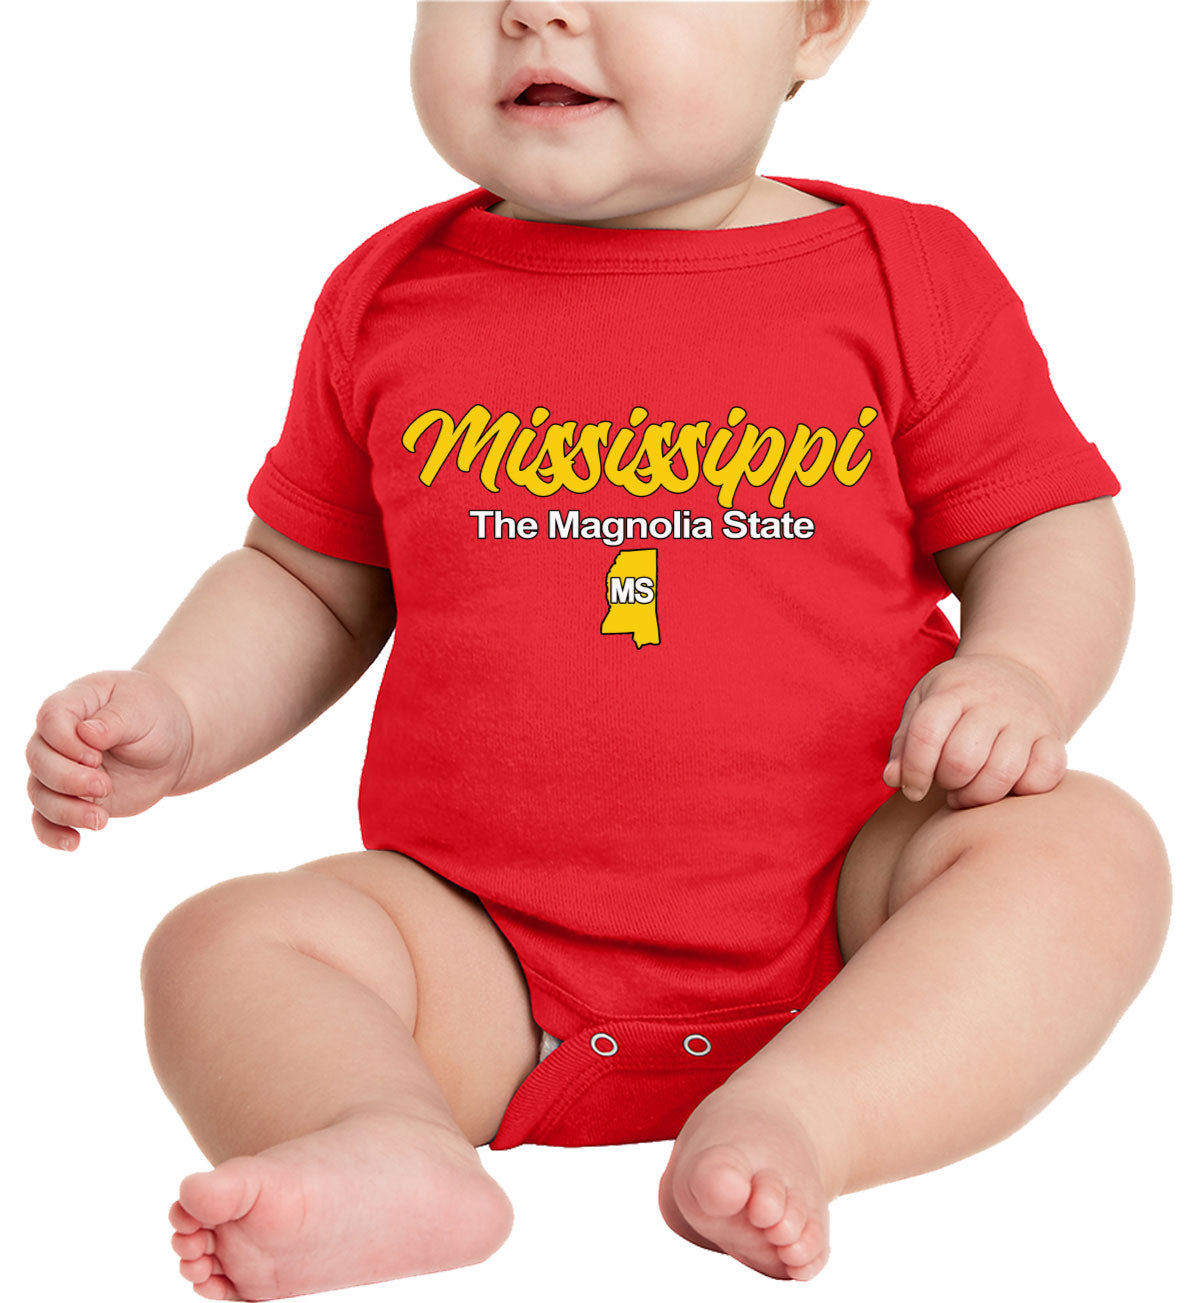 Mississippi The Magnolia State Baby Onesie